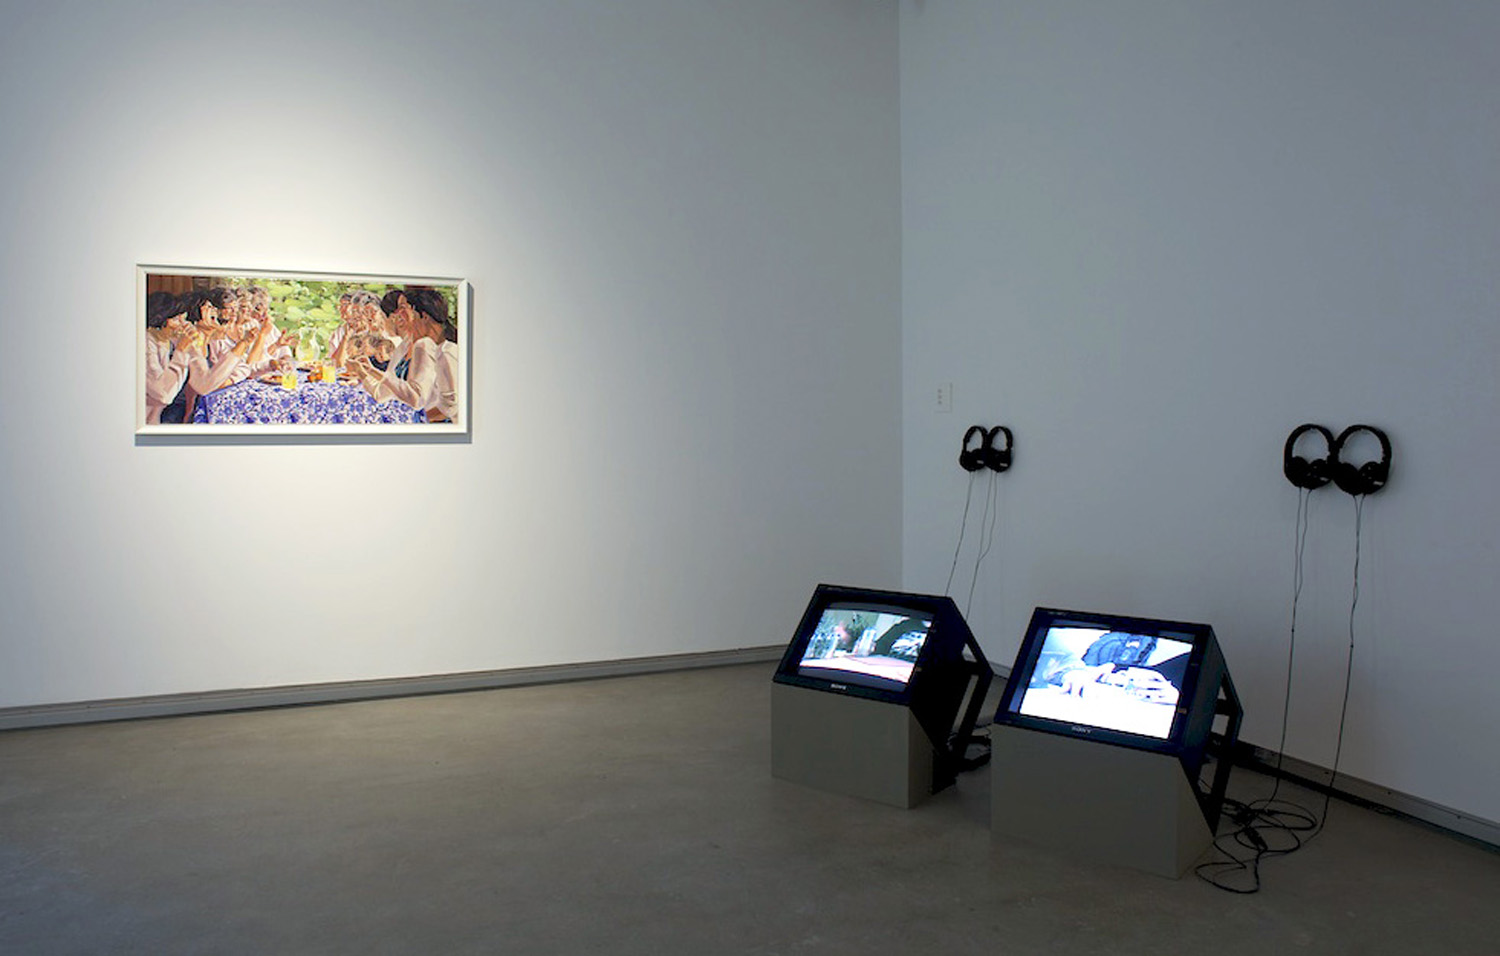 My Winnipeg: The Artists' Choice | February 9 to March 17, 2013 - Plug In ICA